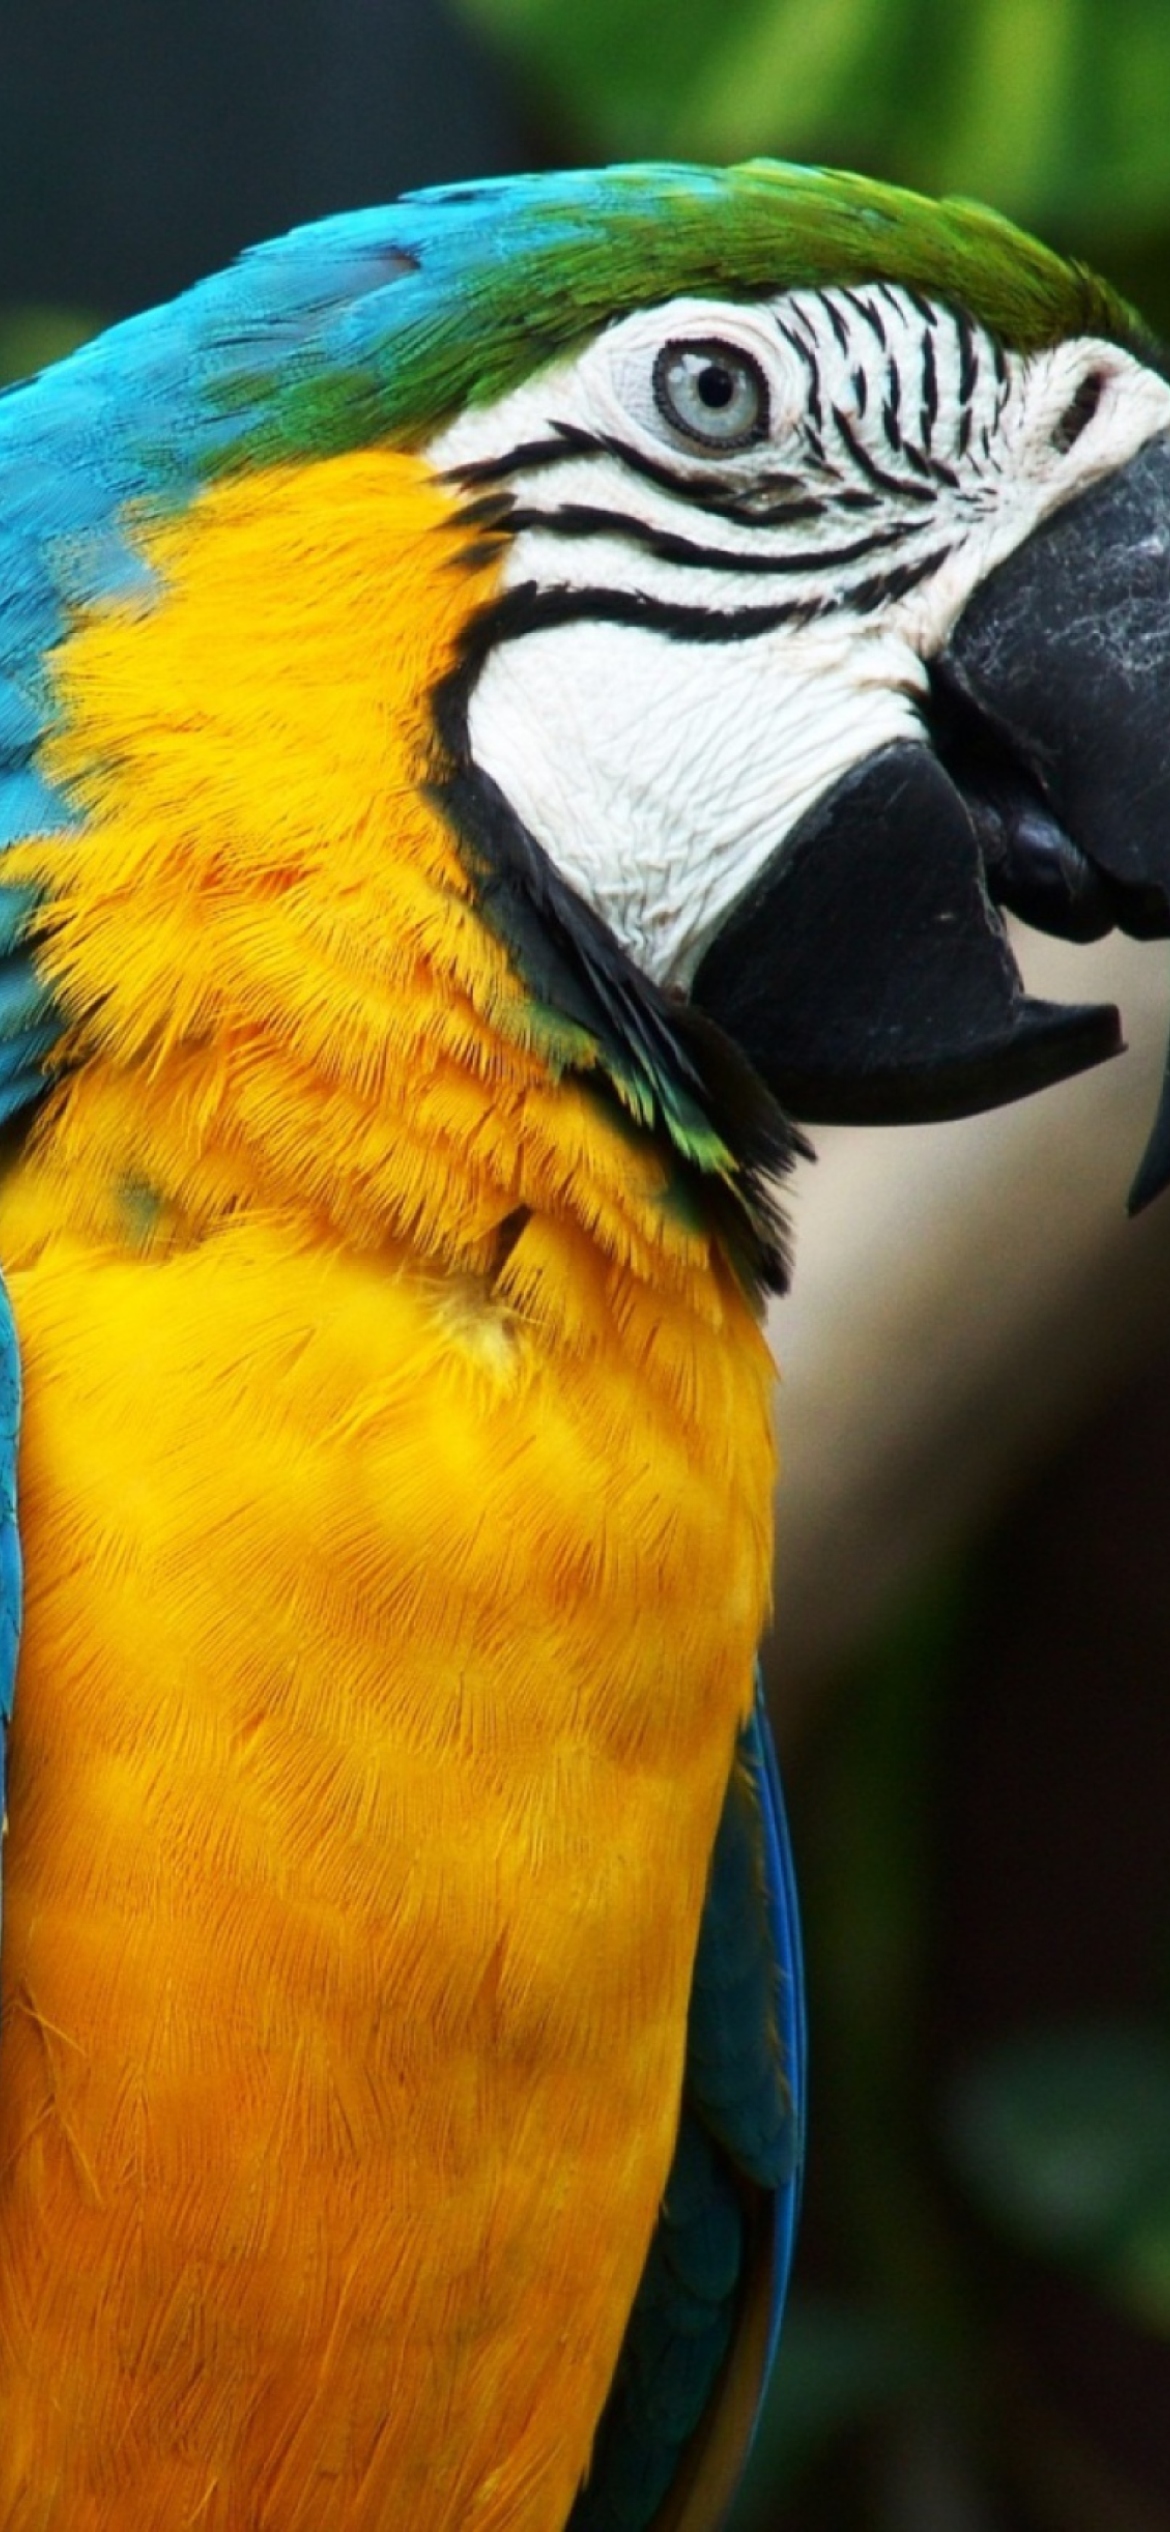 Blue And Yellow Macaw wallpaper 1170x2532